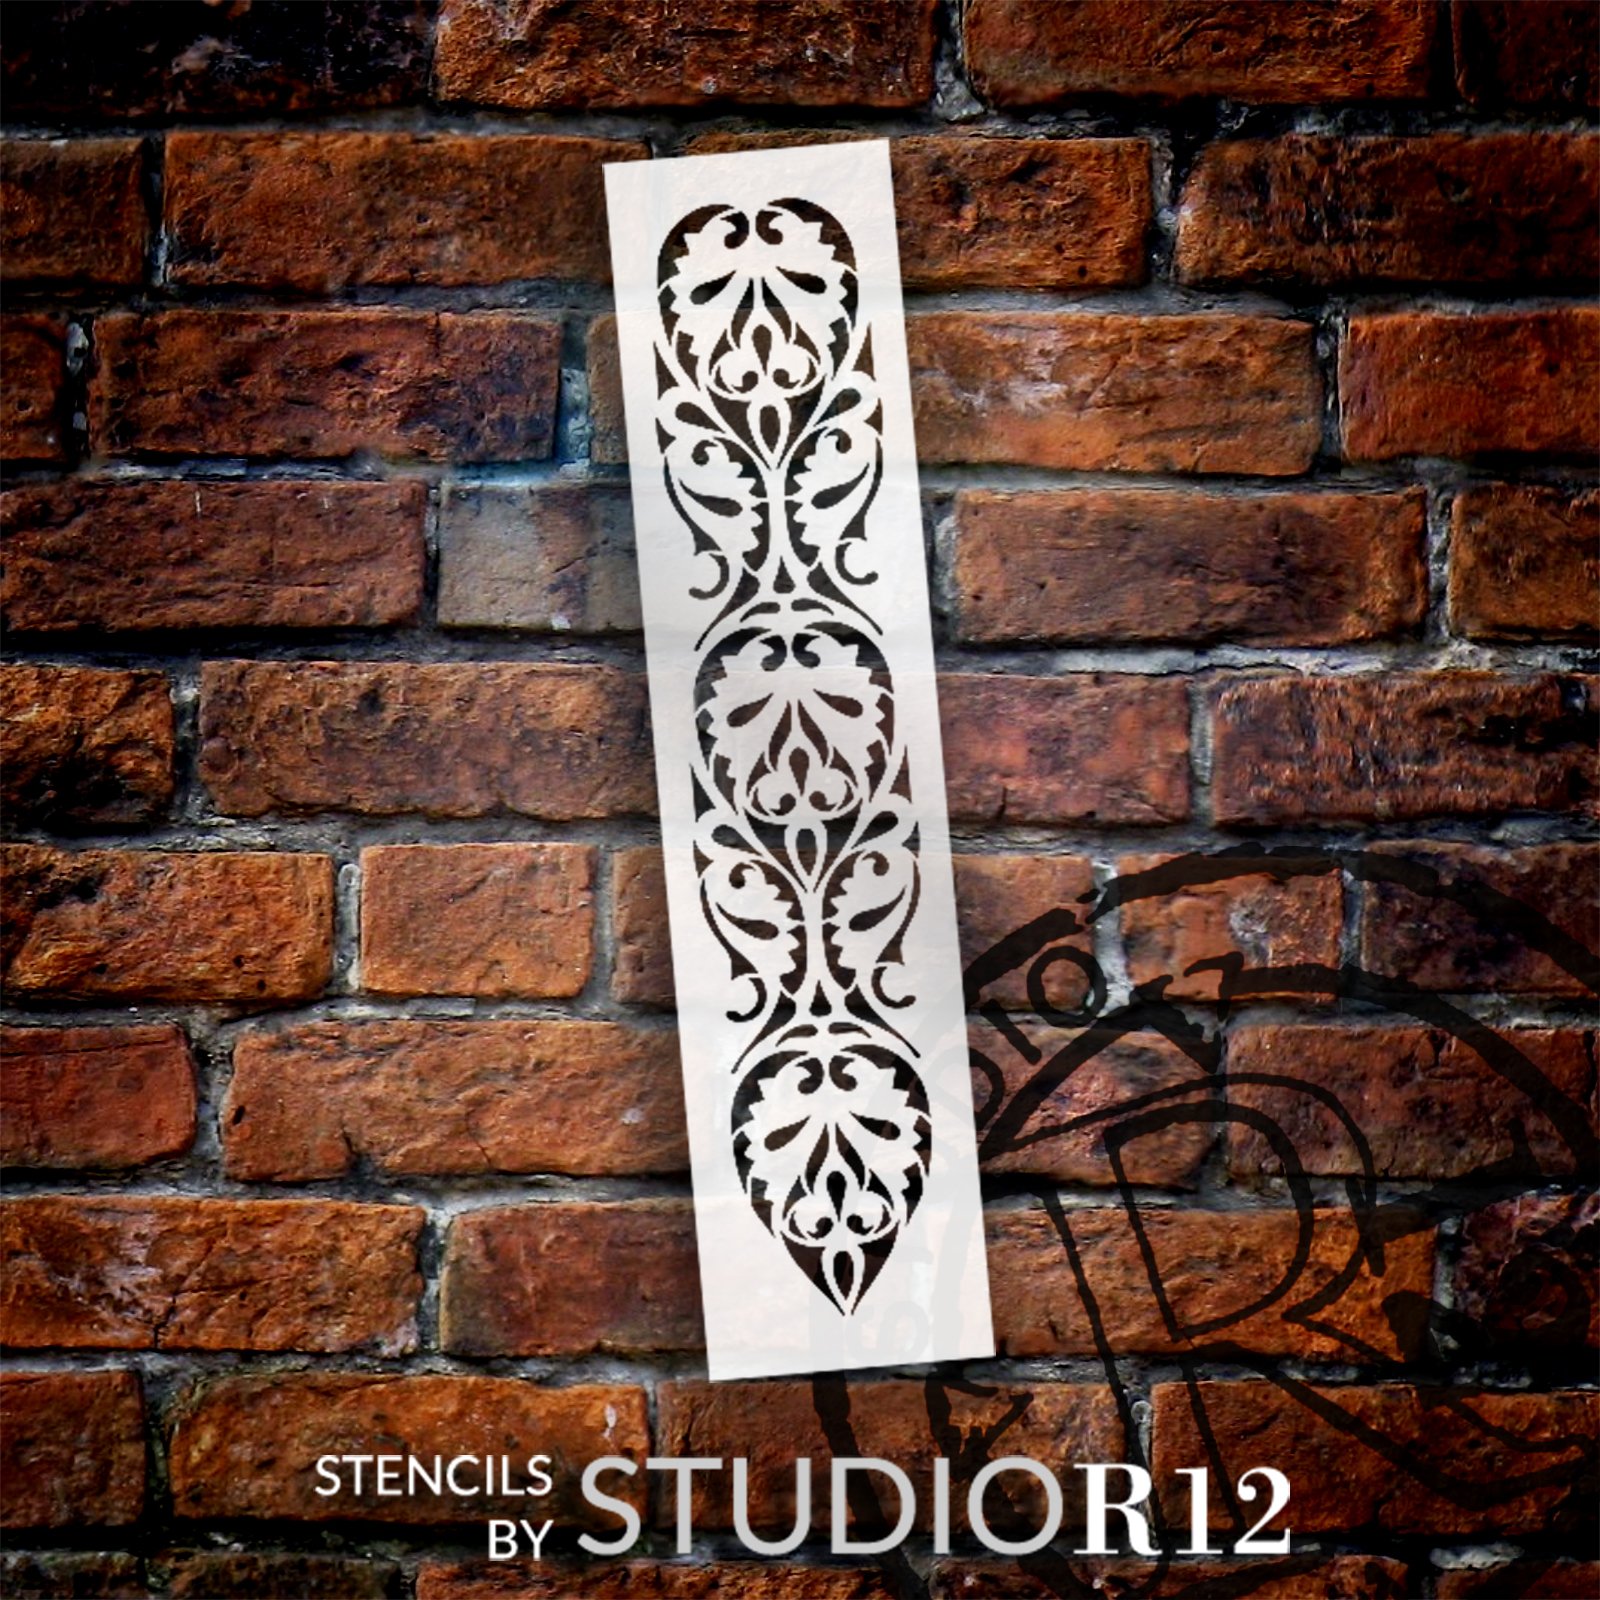 Egyptian Ornamental Leaf Band Stencil by StudioR12 | Craft DIY Repeating Pattern Home Decor | Paint Wood Sign | Reusable Mylar Template | Select Size